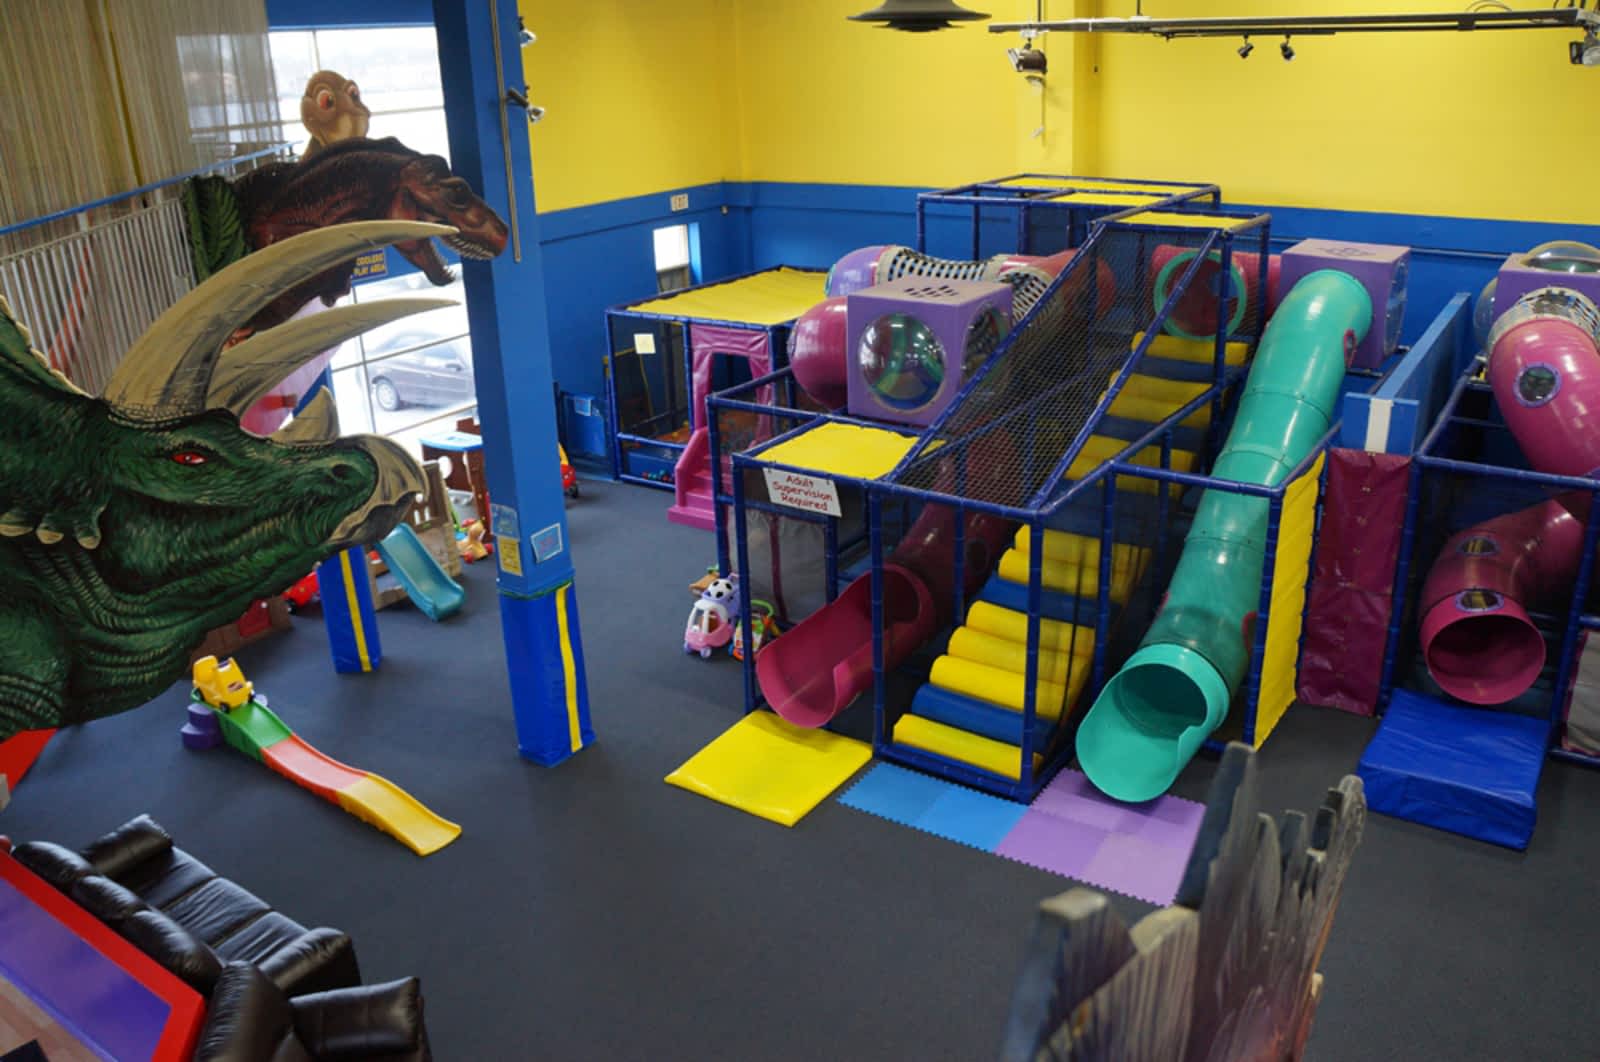 Where are indoor playgrounds often located?